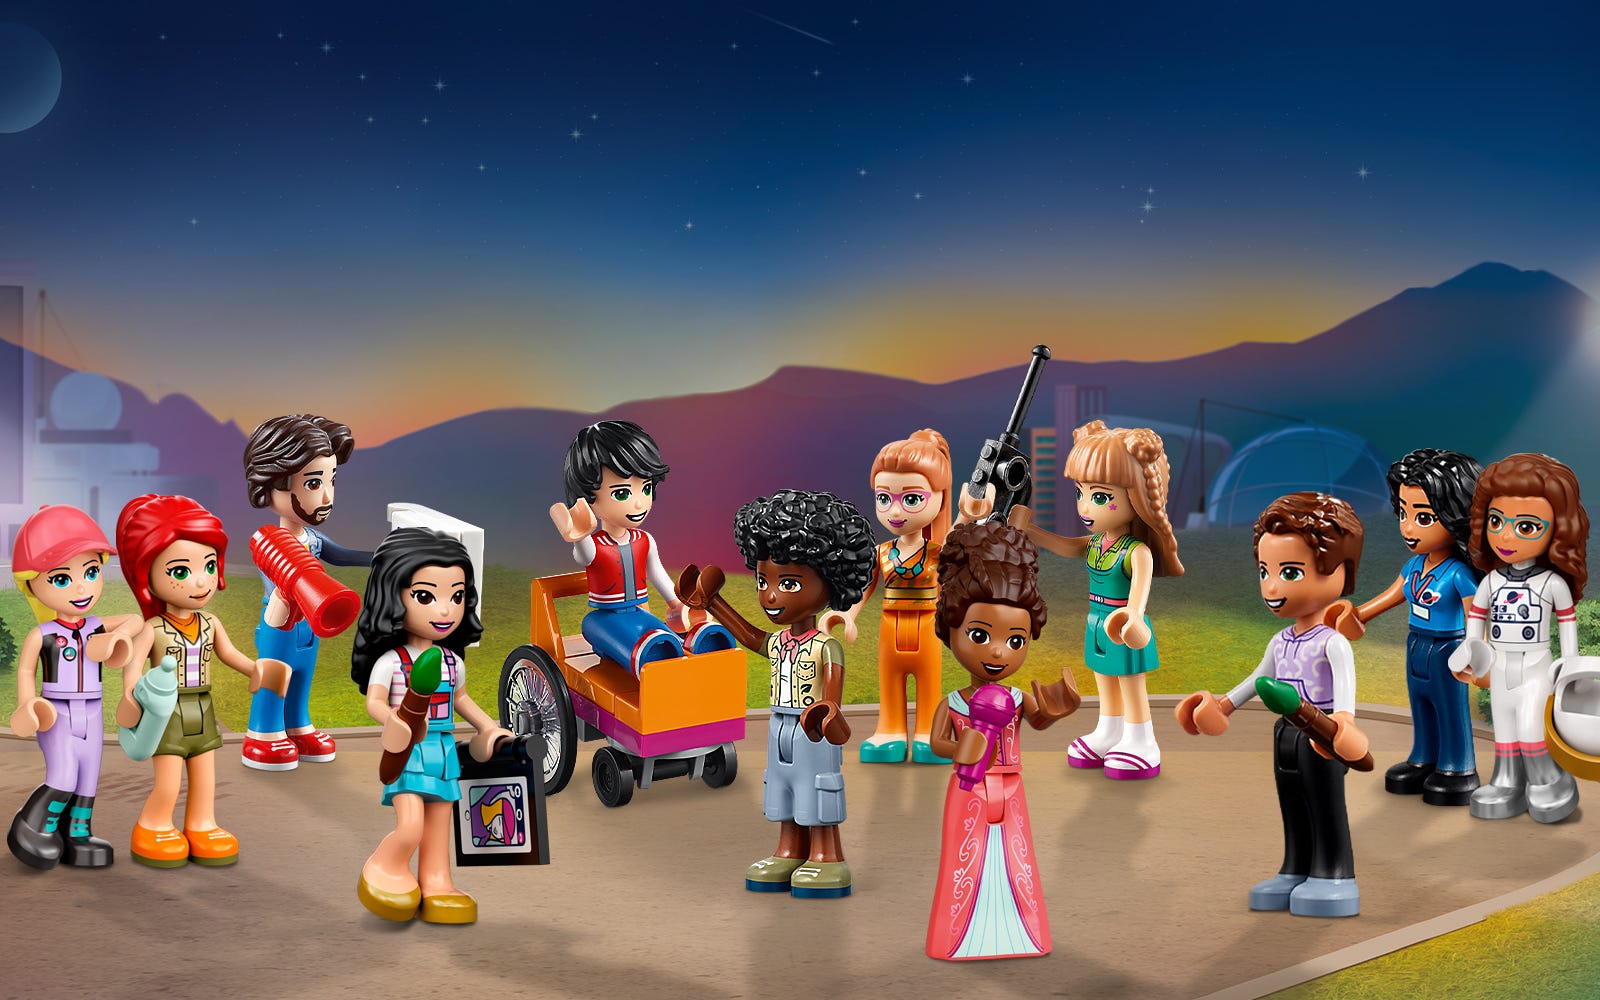 What Are the Lego Friends Pets Names?